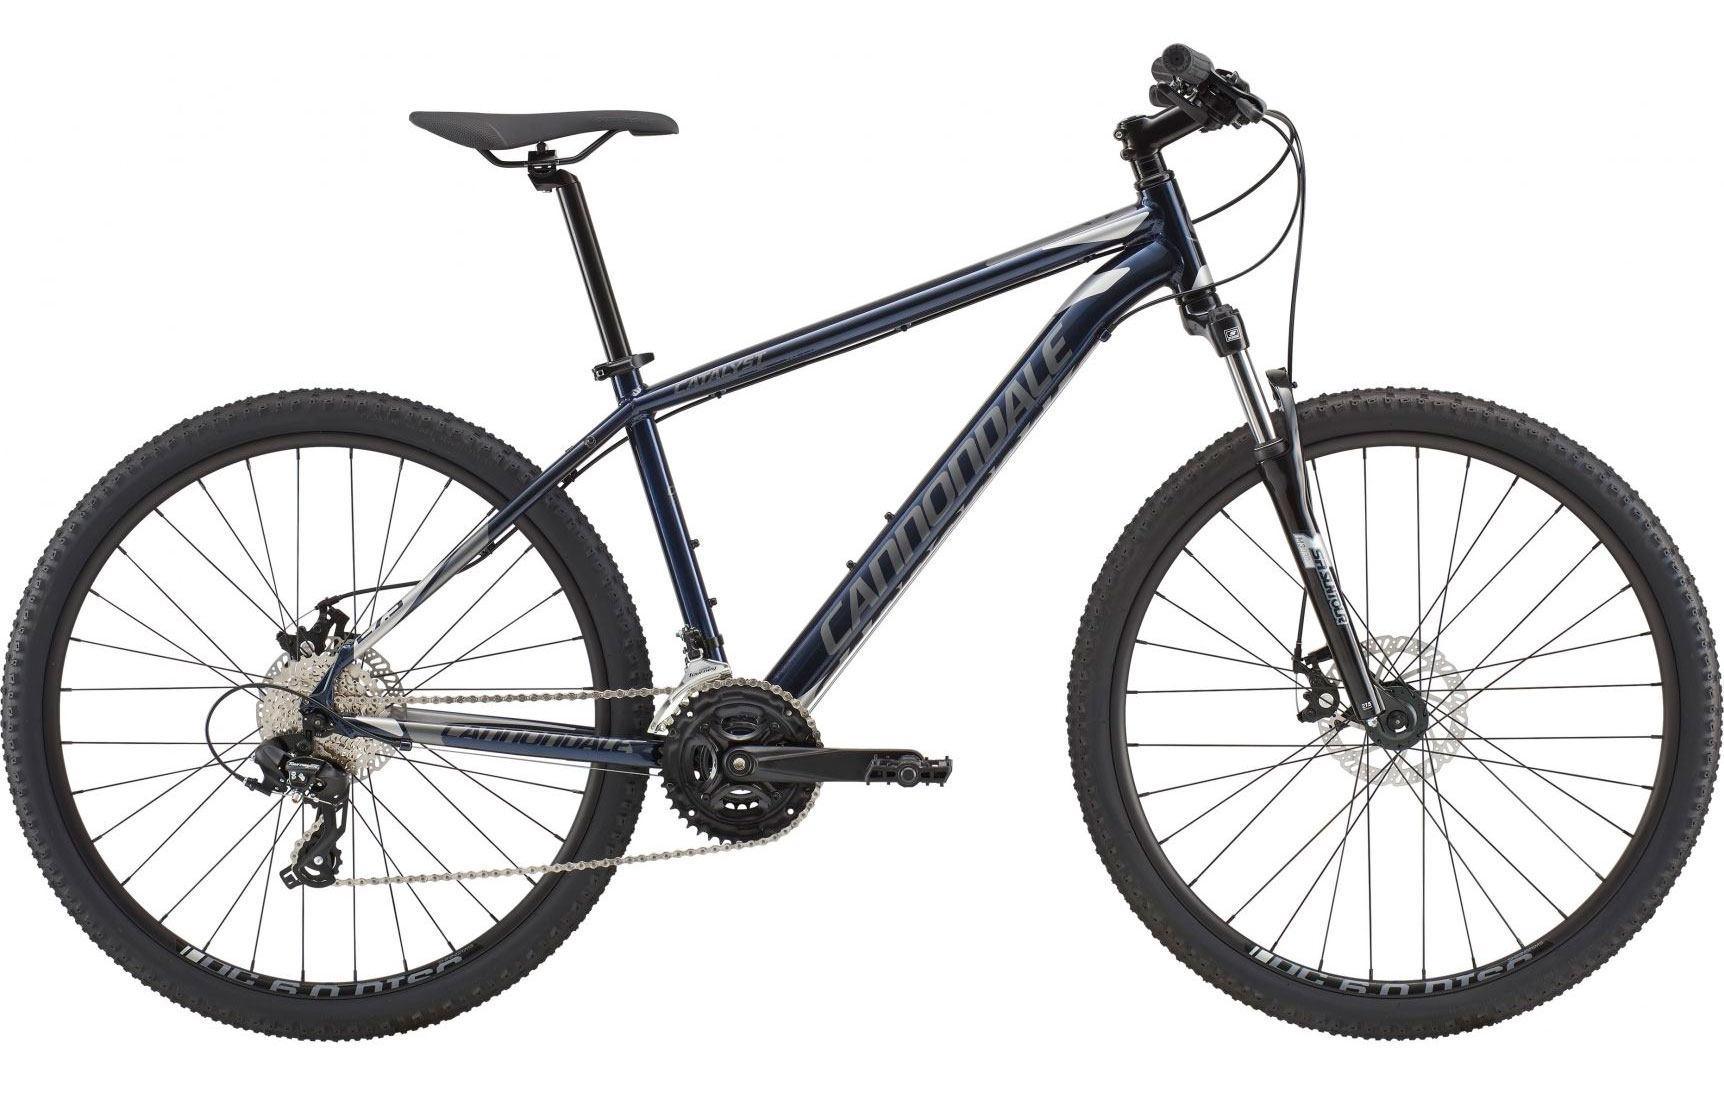 Велосипед 27,5 "Cannondale CATALYST 3 рама - L 2018 MDN